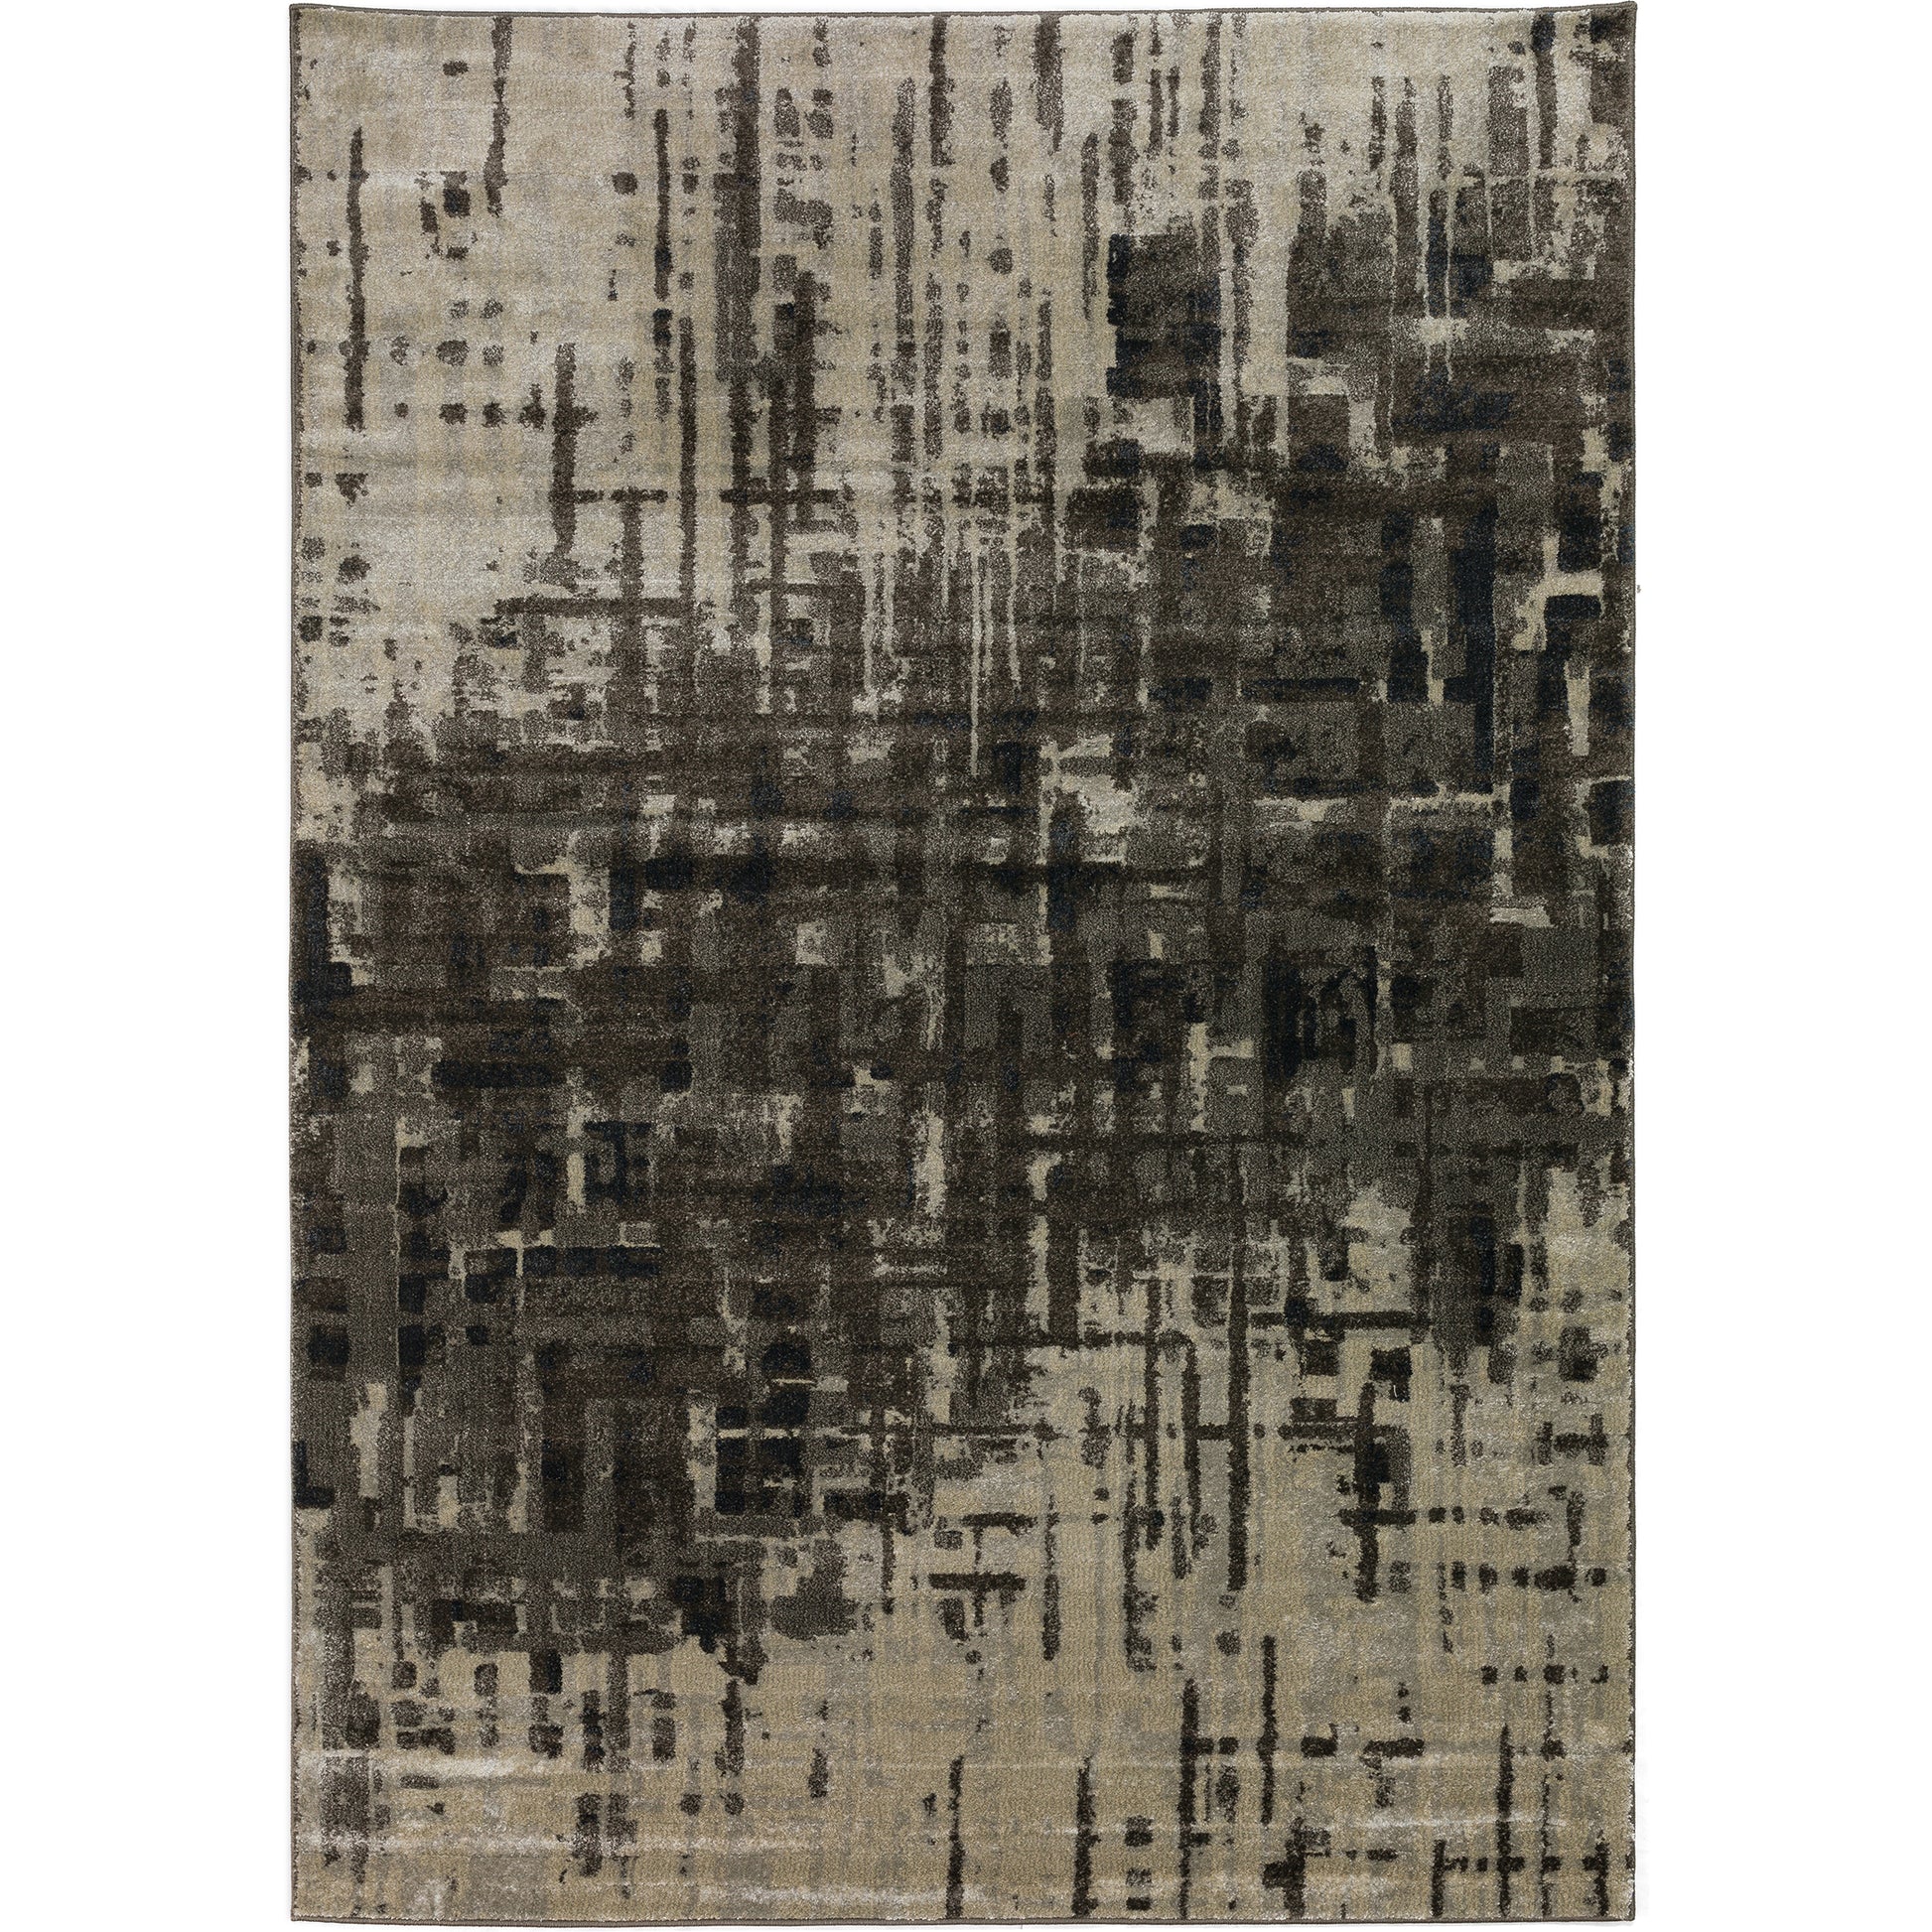 Dalyn Upton Up1 Pewter Area Rug